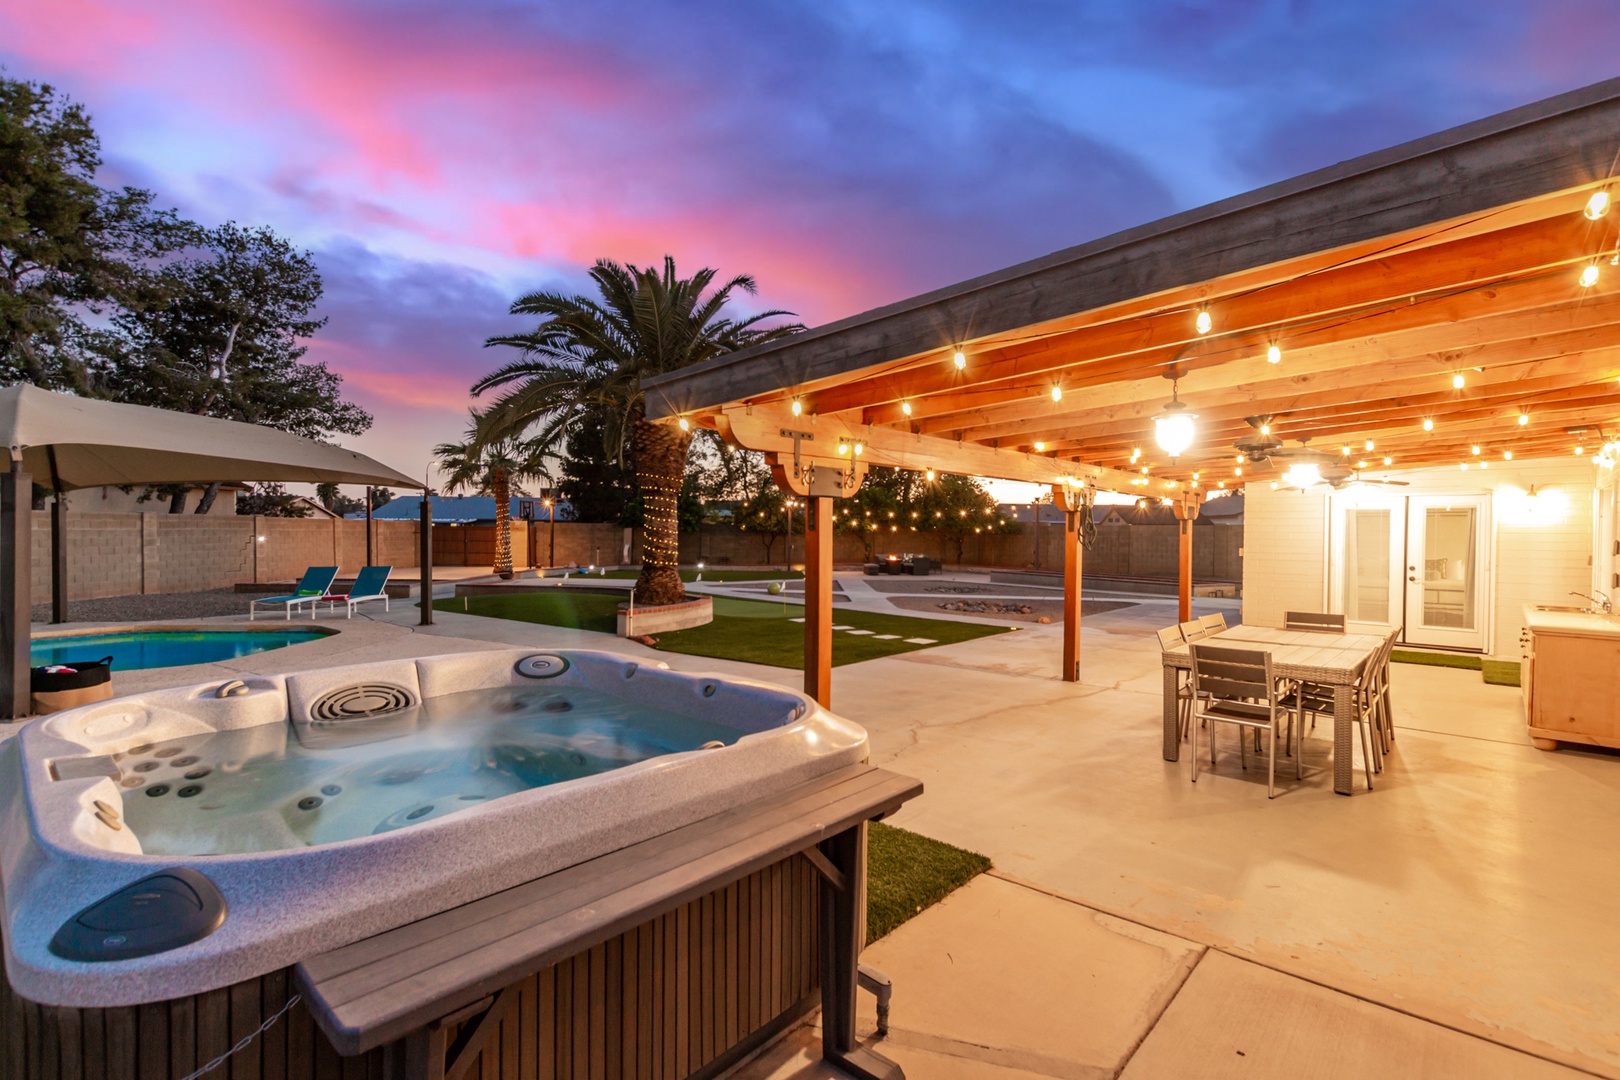 Backyard Oasis with a hot tub, pool, putting greens, lounge area with fire pit and more!